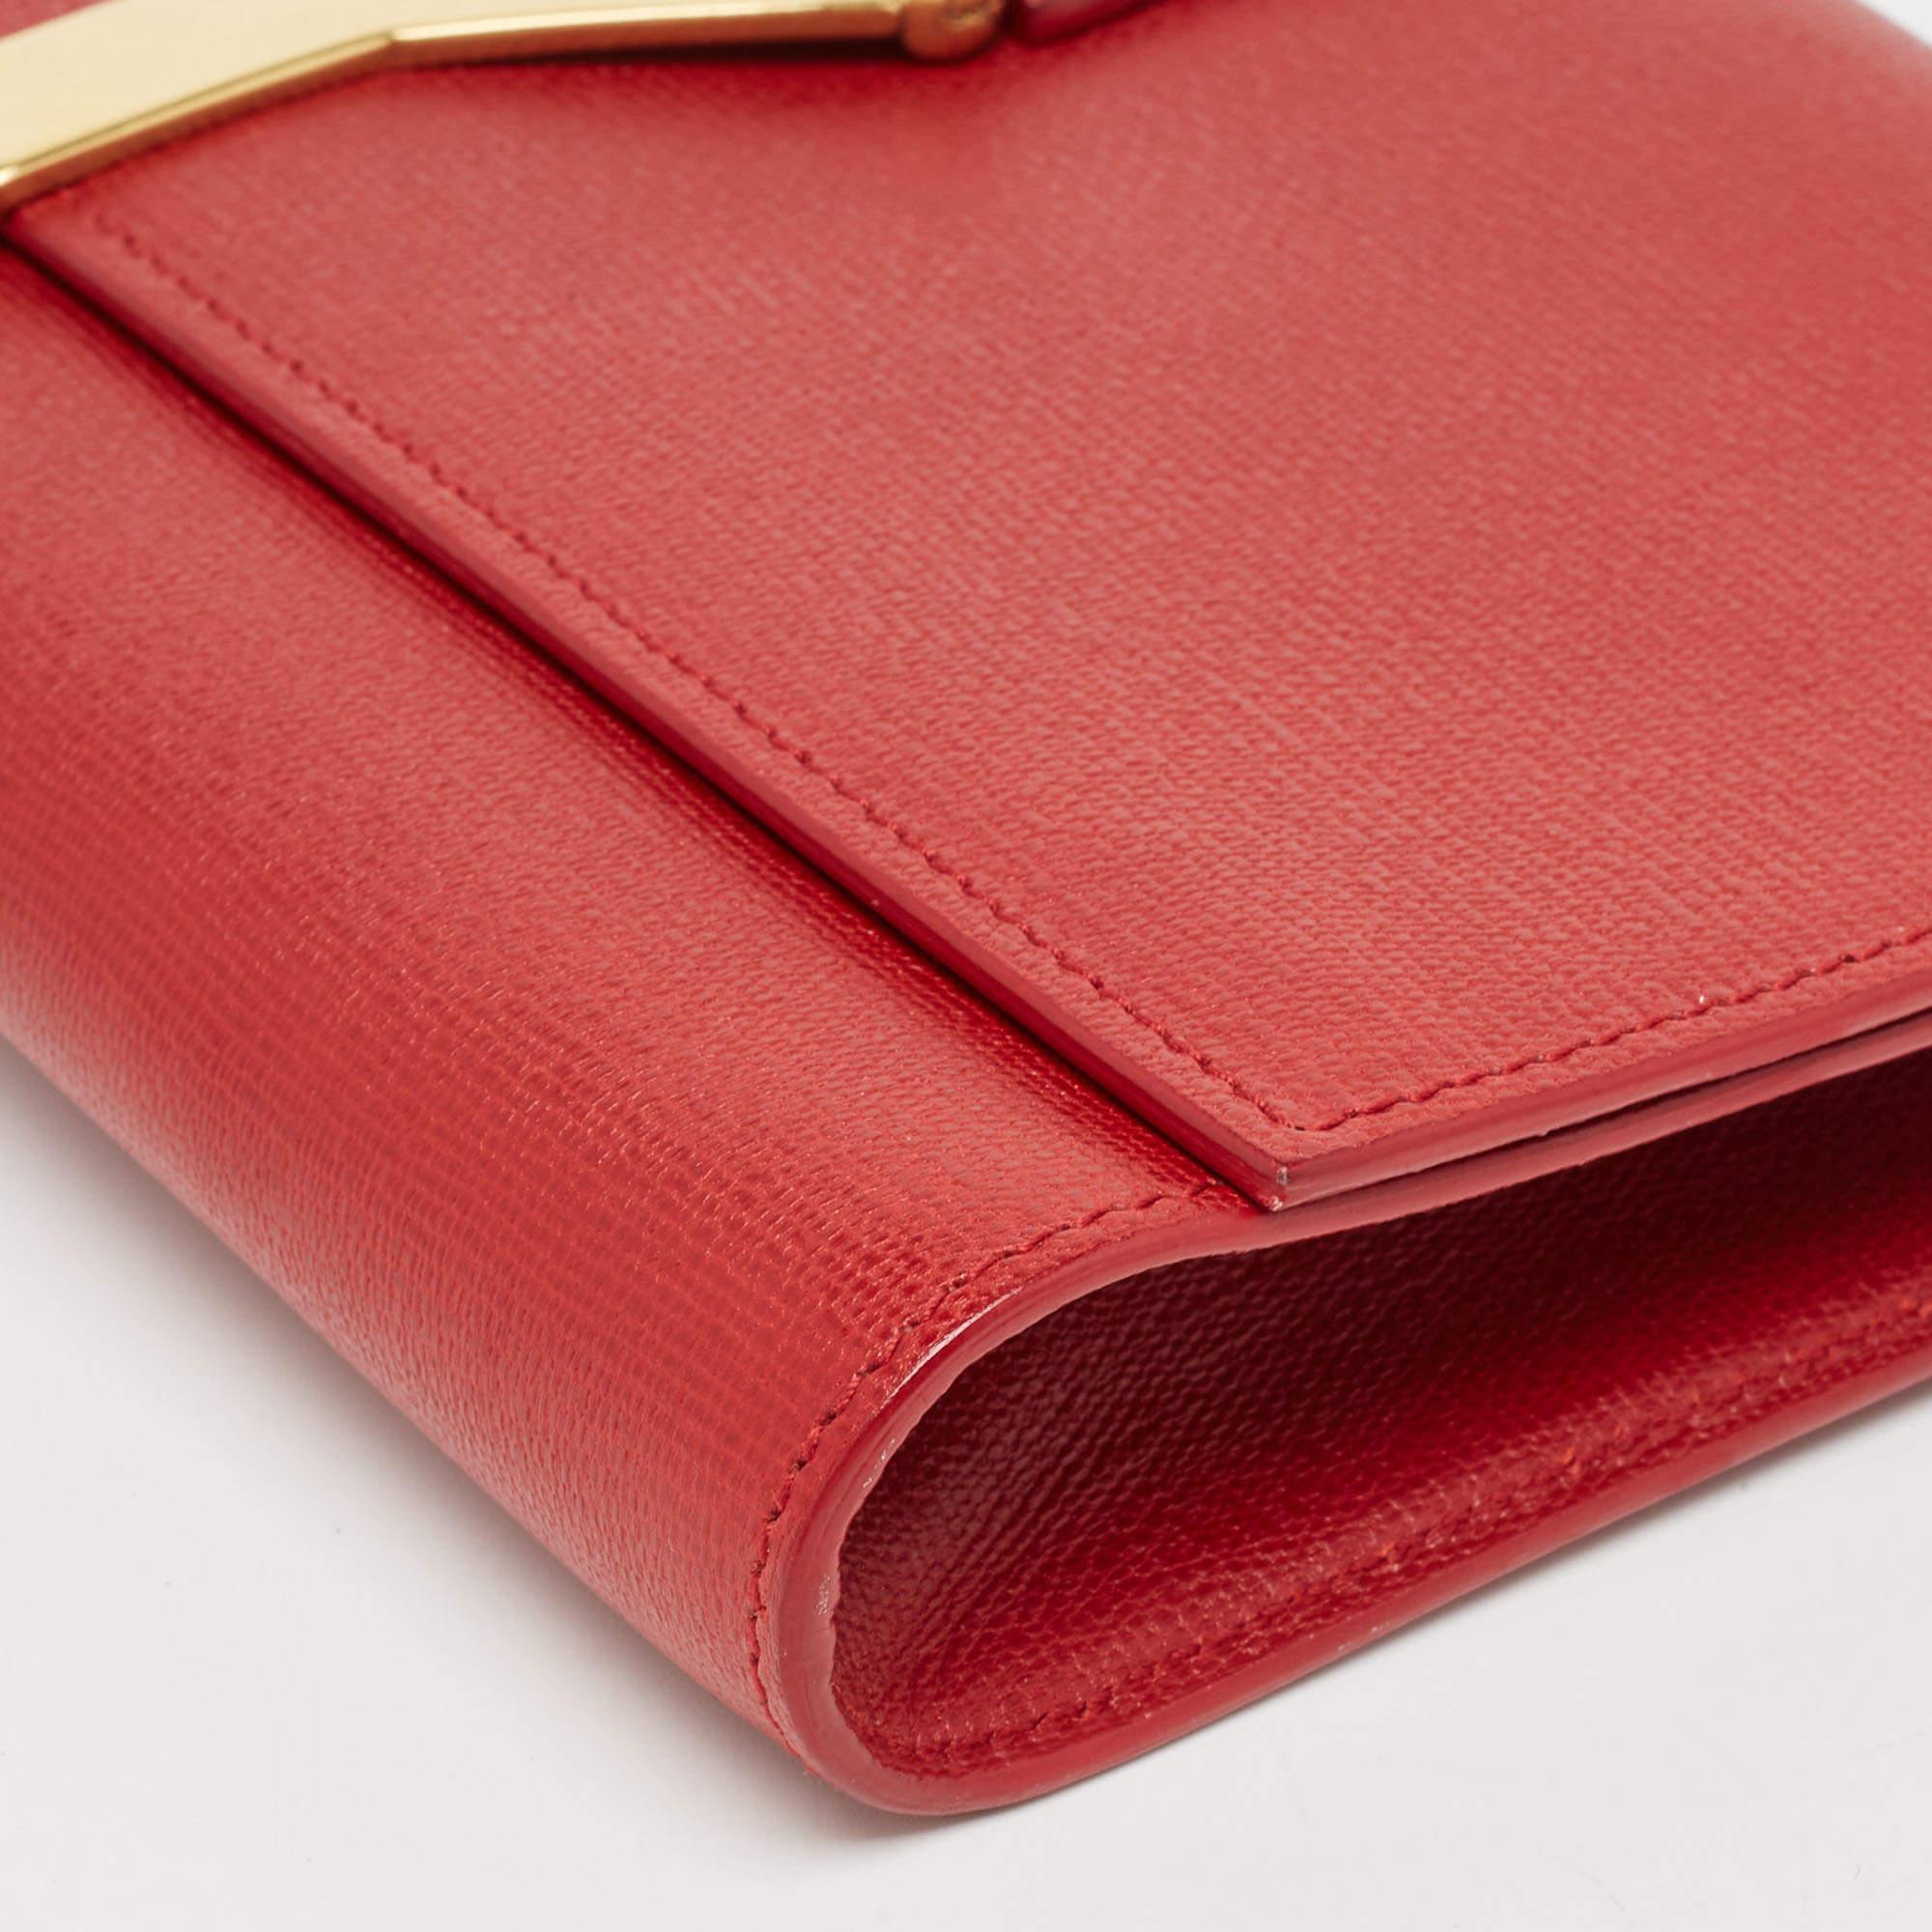 Yves Saint Laurent Red Leather Y-Ligne Clutch 6